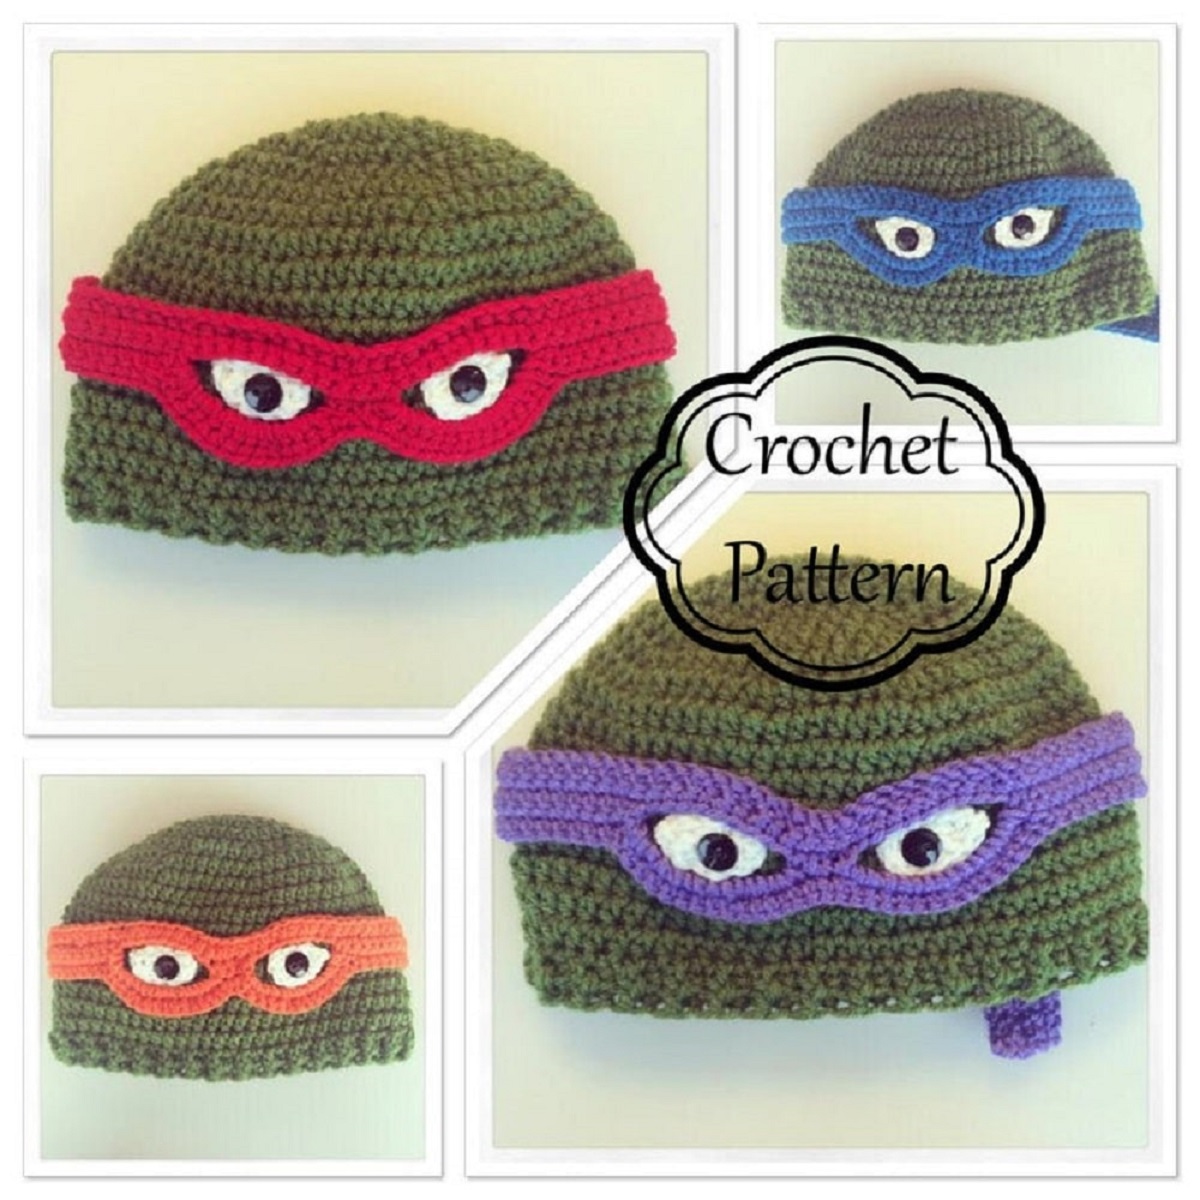 Green ninja turtle style beanies with a red, purple, orange, or blue strip around the middle and two eyes in the center.